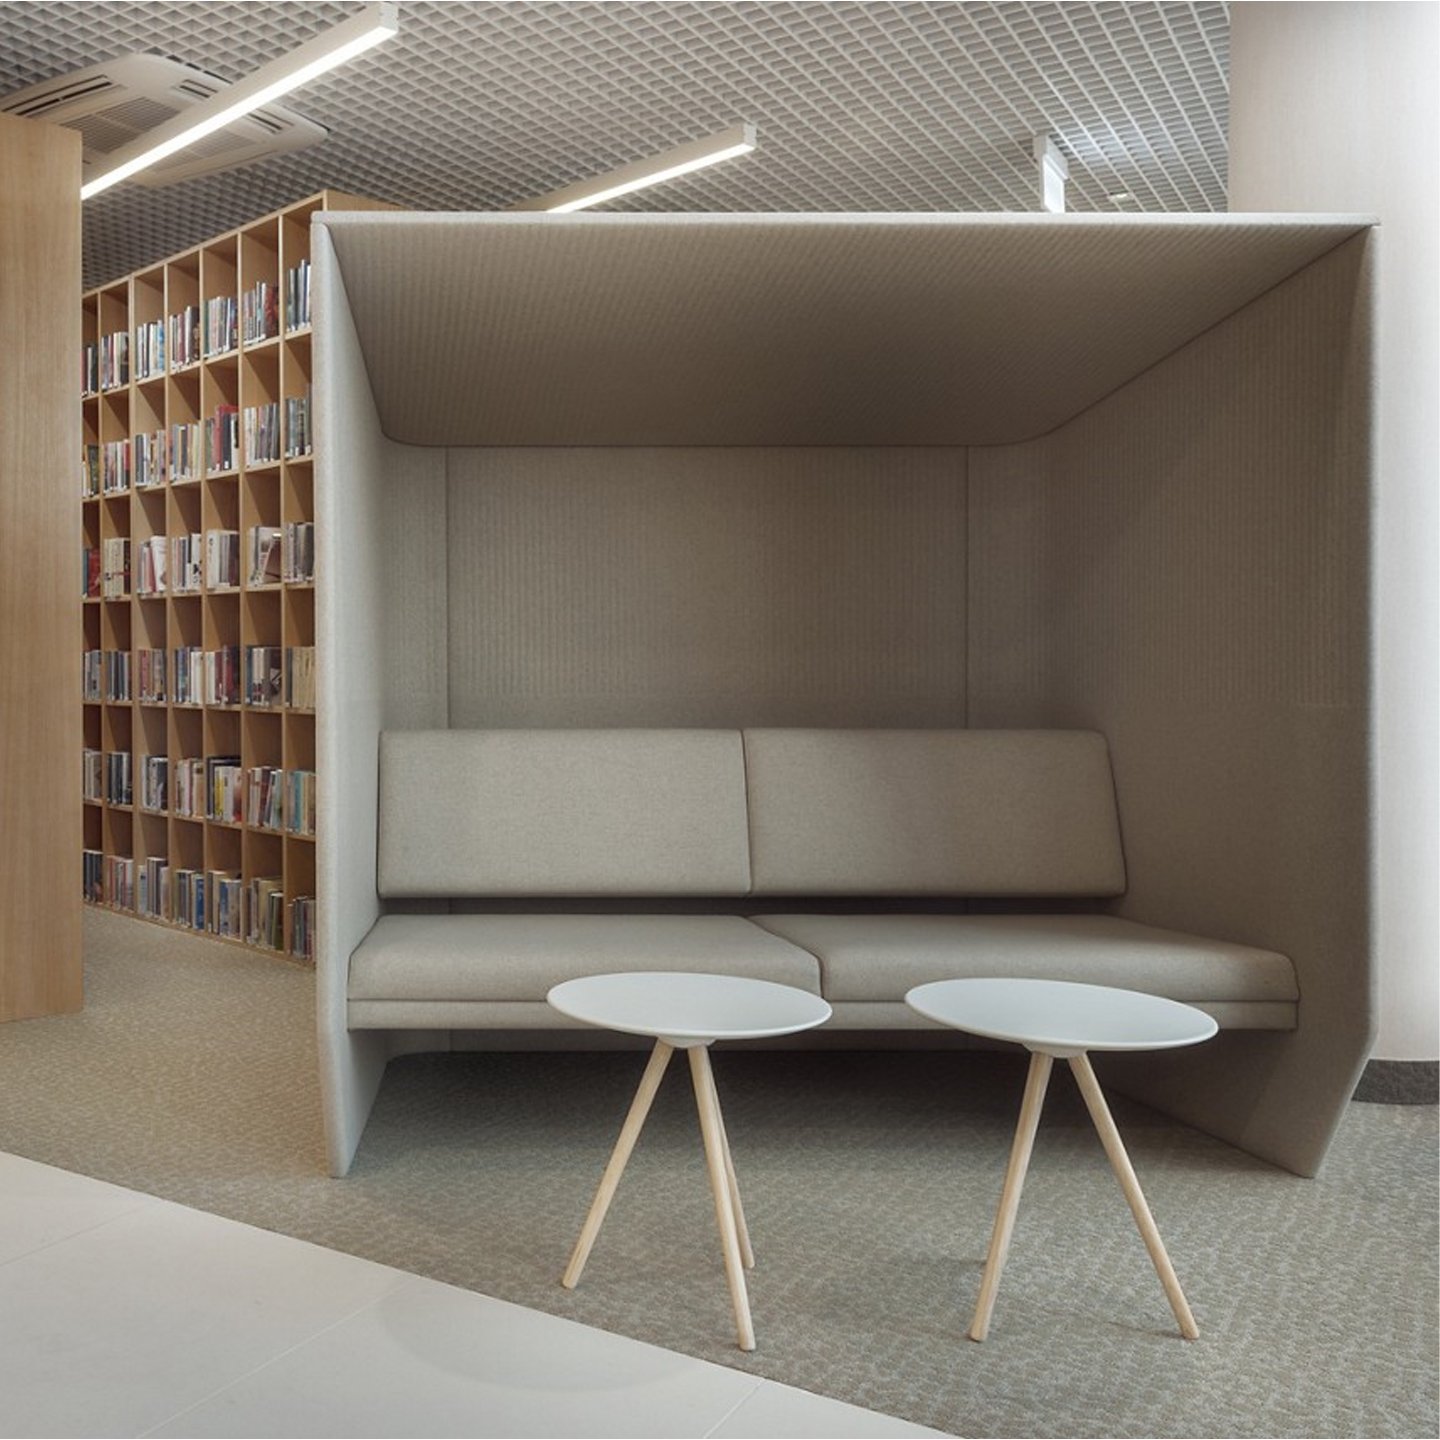 Haworth BuzziHub Booth in grey color with white tables at it in a office library 